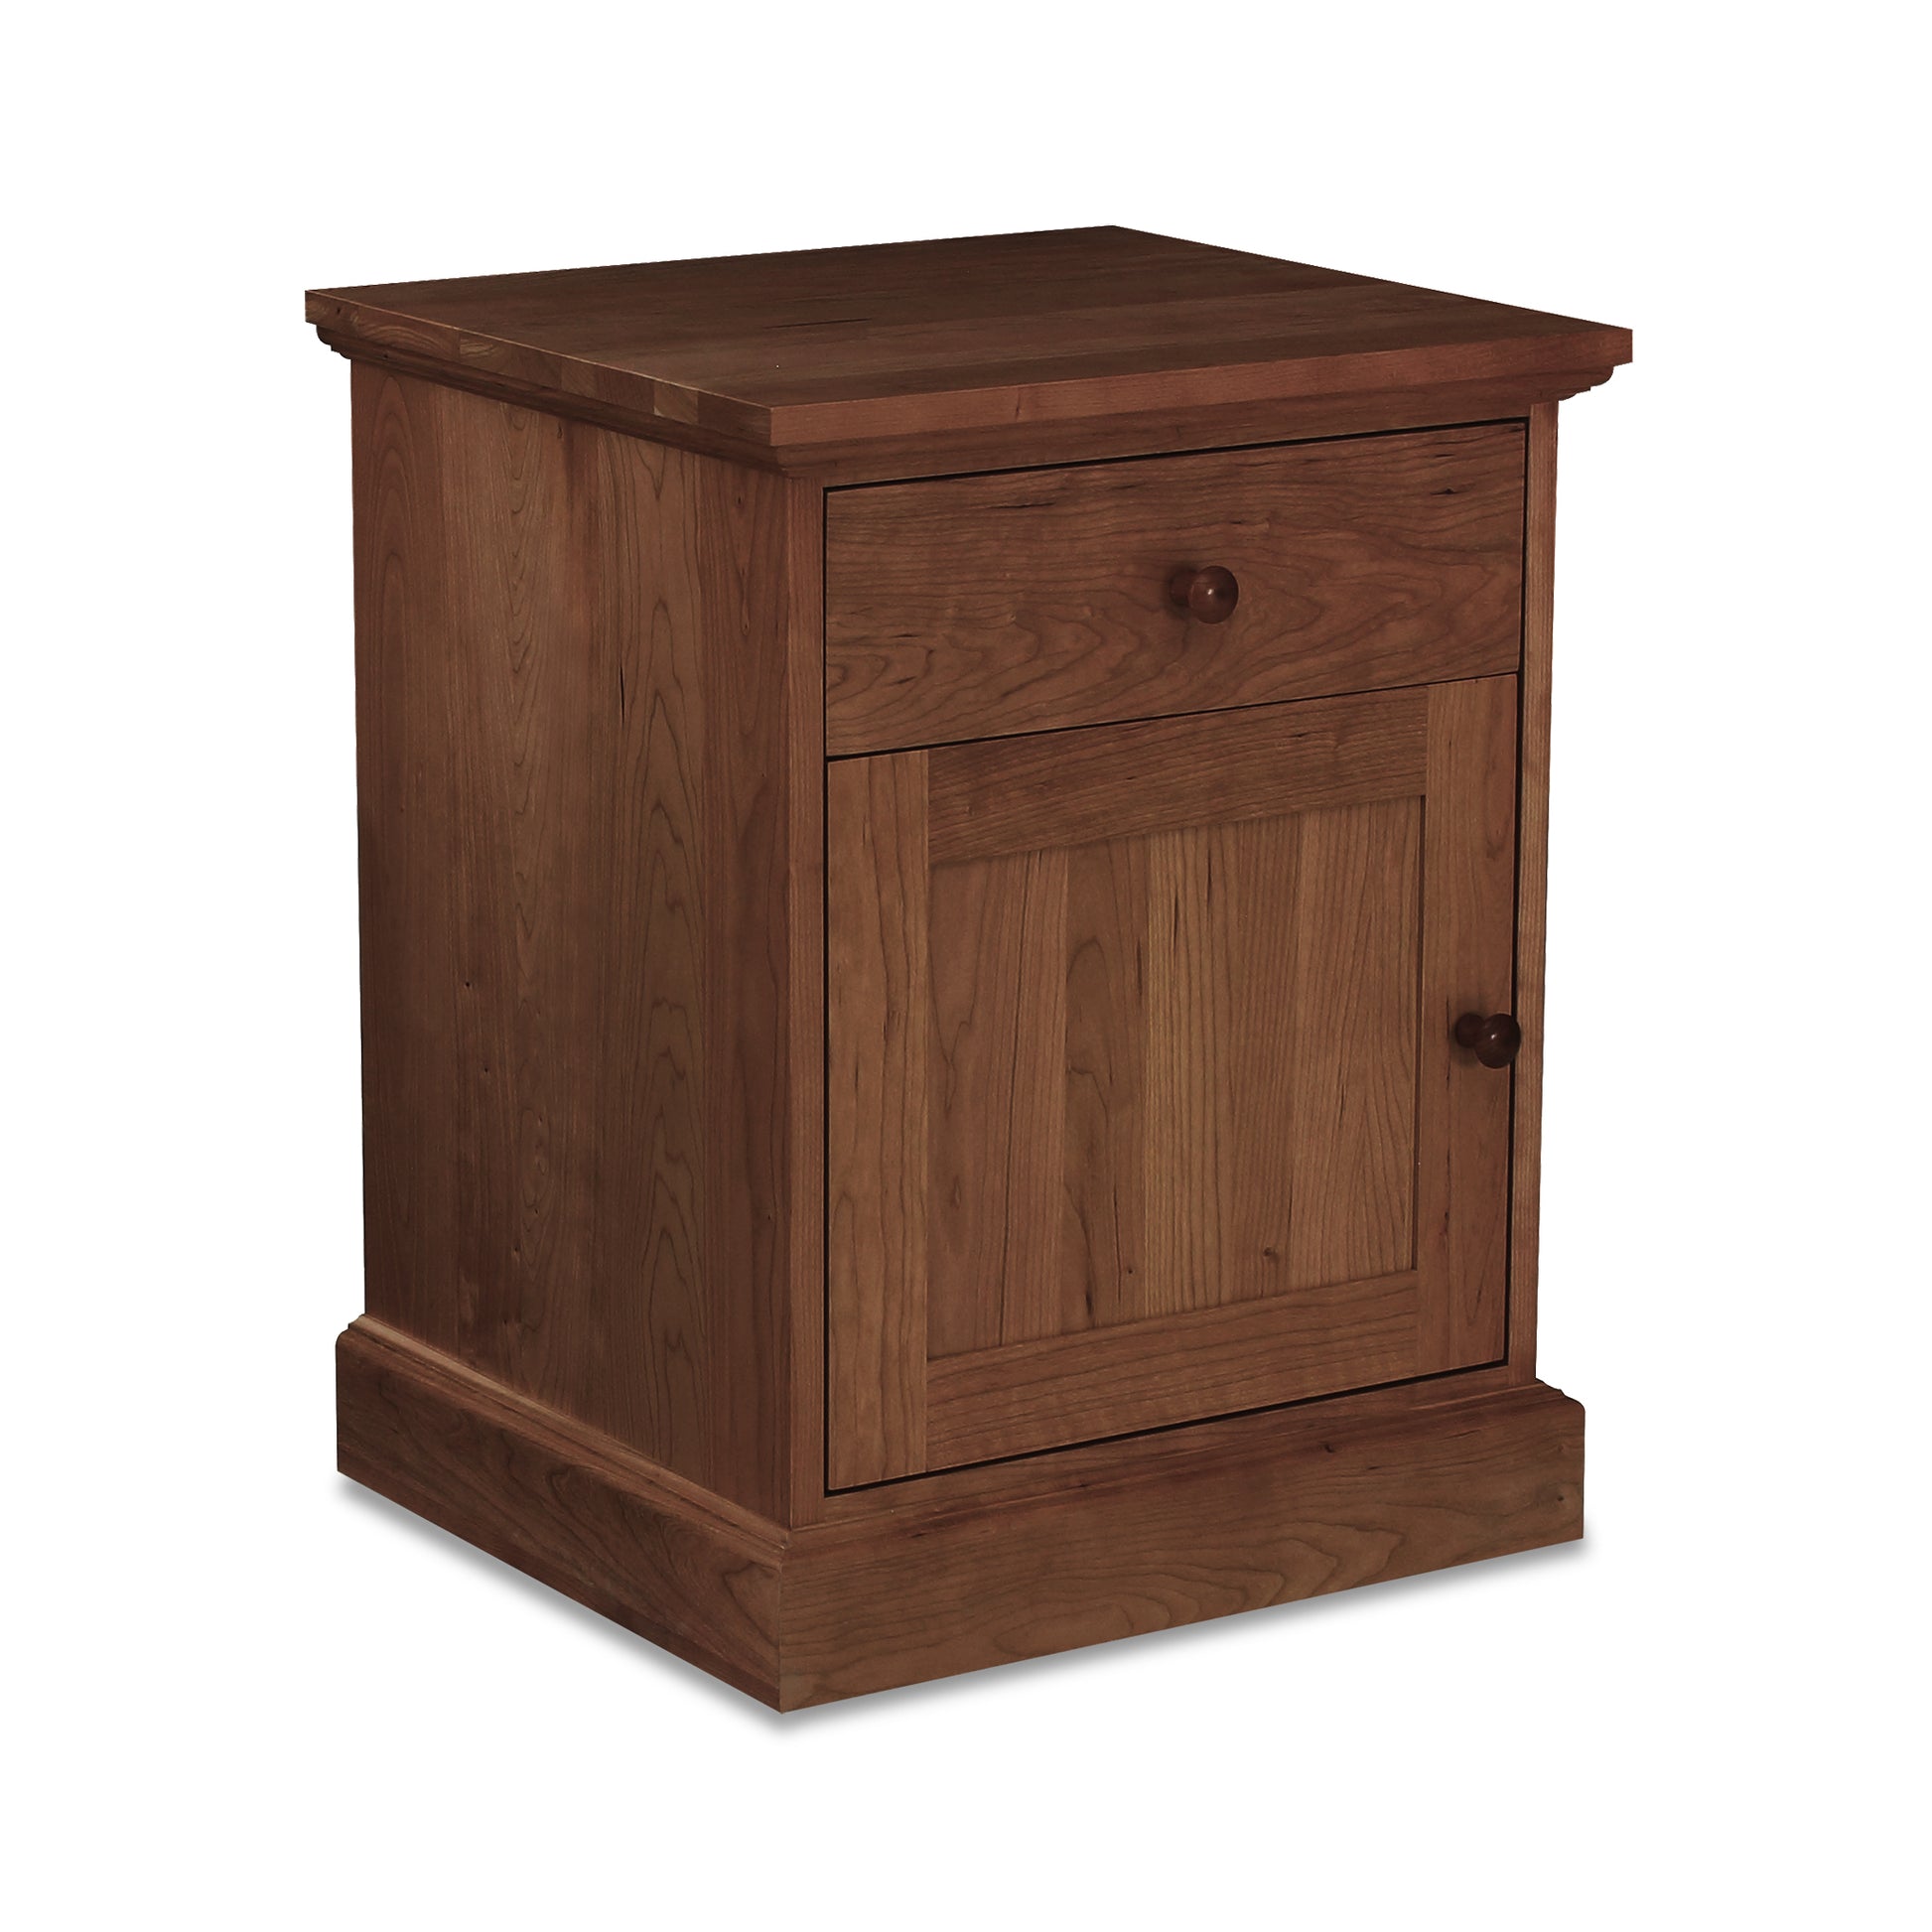 A small Lyndon Furniture New England Shaker 1-Drawer Nightstand with Door made of hardwood.